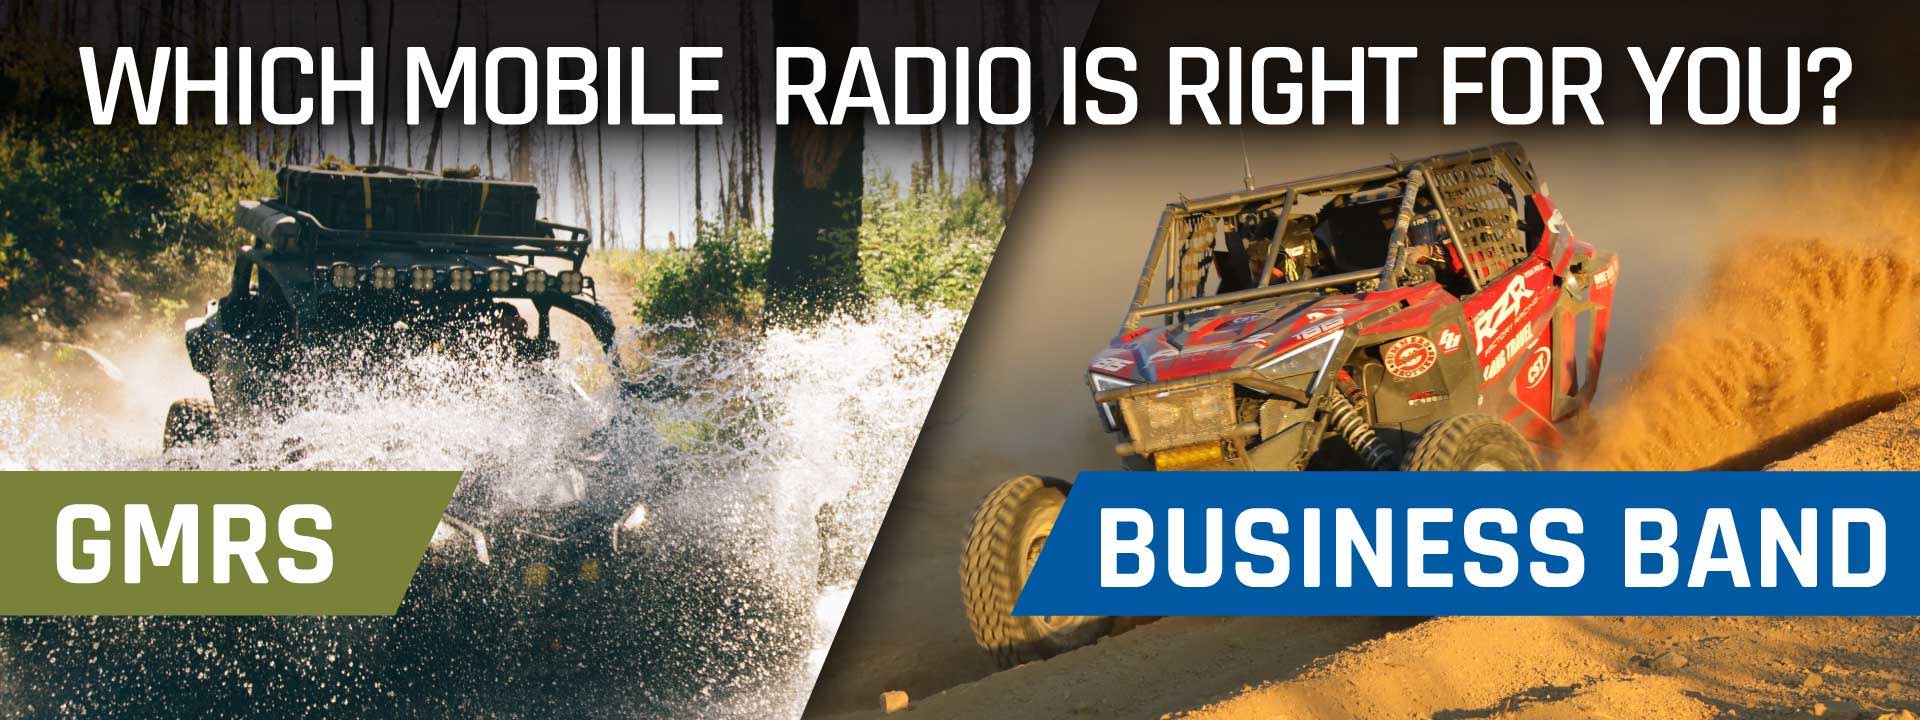 which radio is right for you - GMRS or business band?